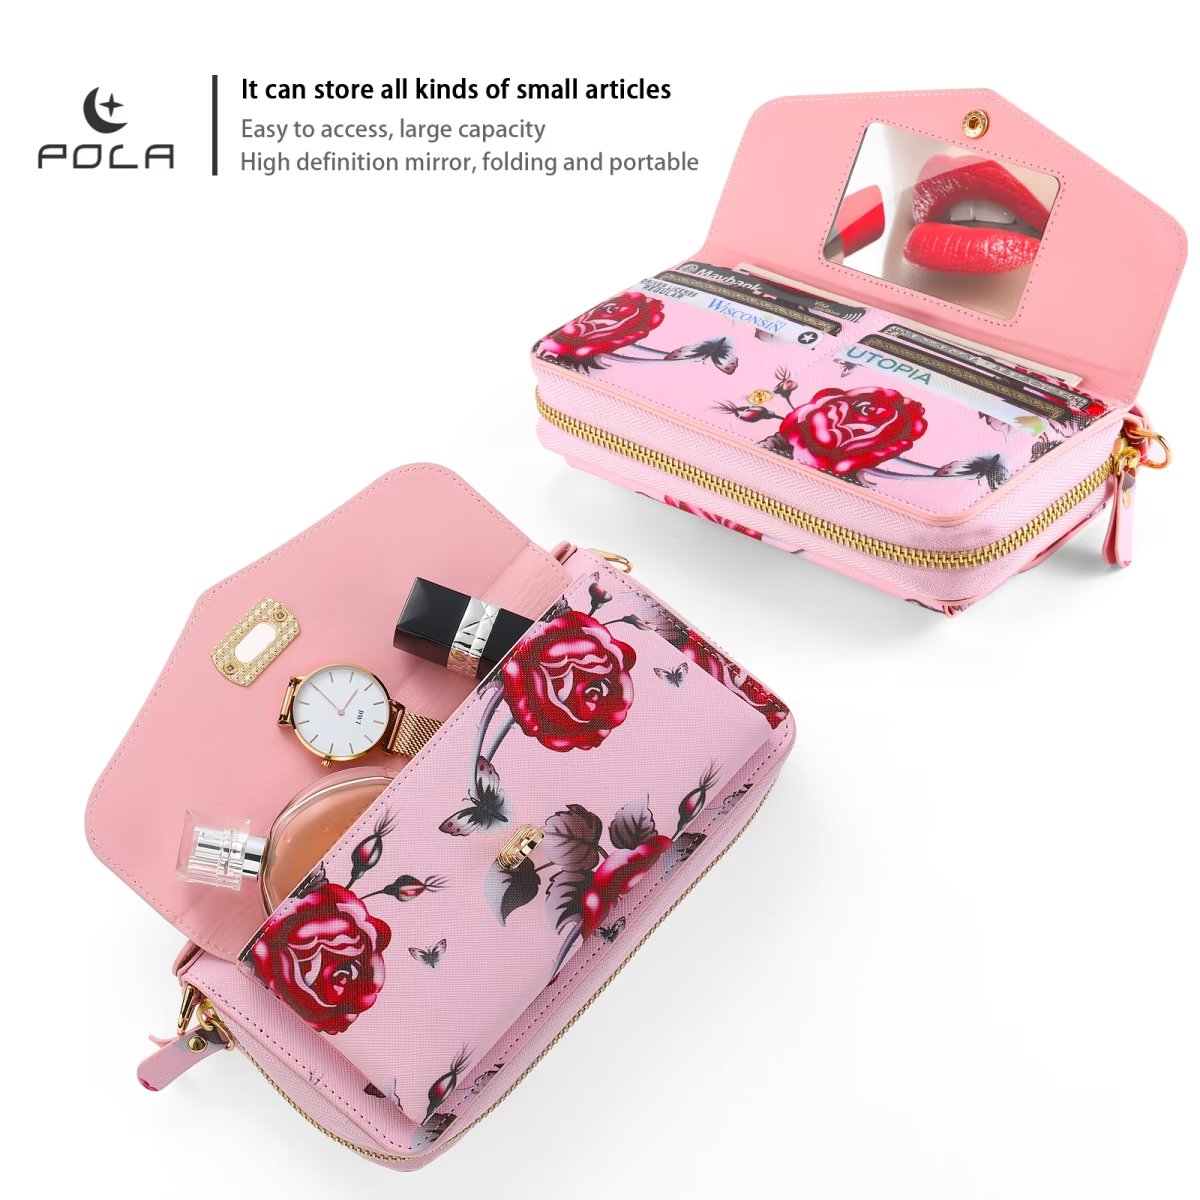 Flower Embellished Zipper Purse and Wallet Duo Case - iPhone